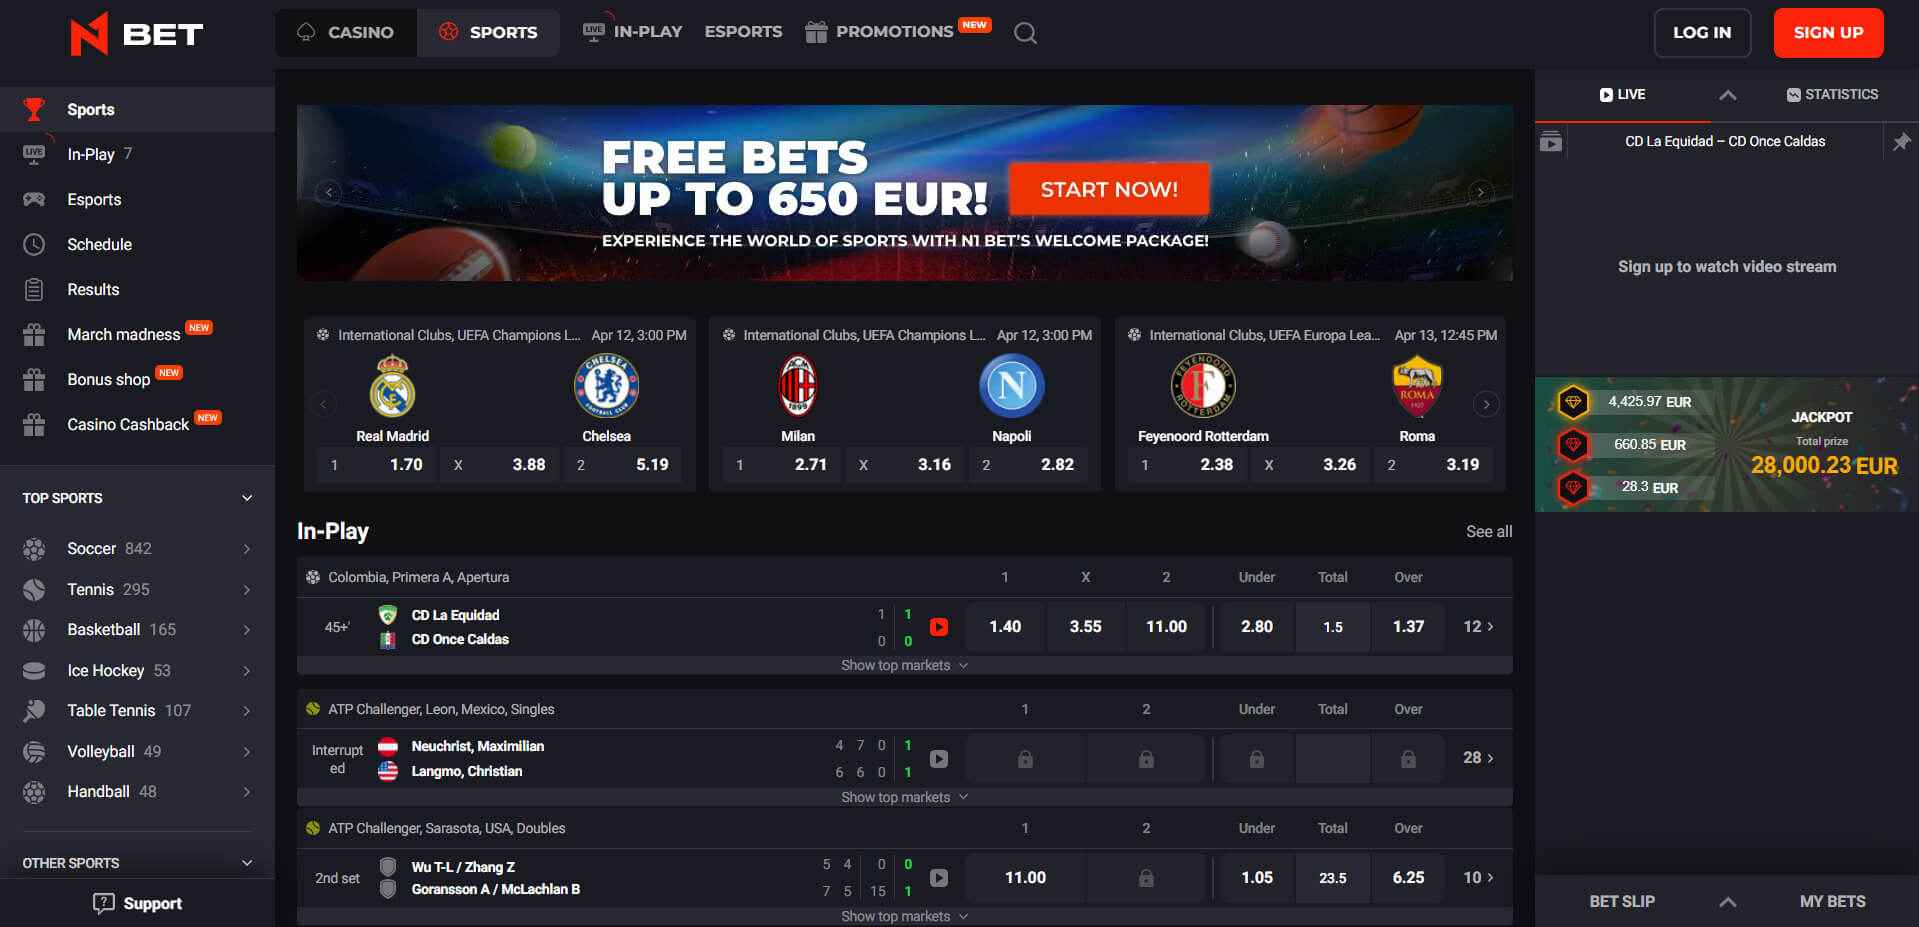 Sports Betting at N1Bet